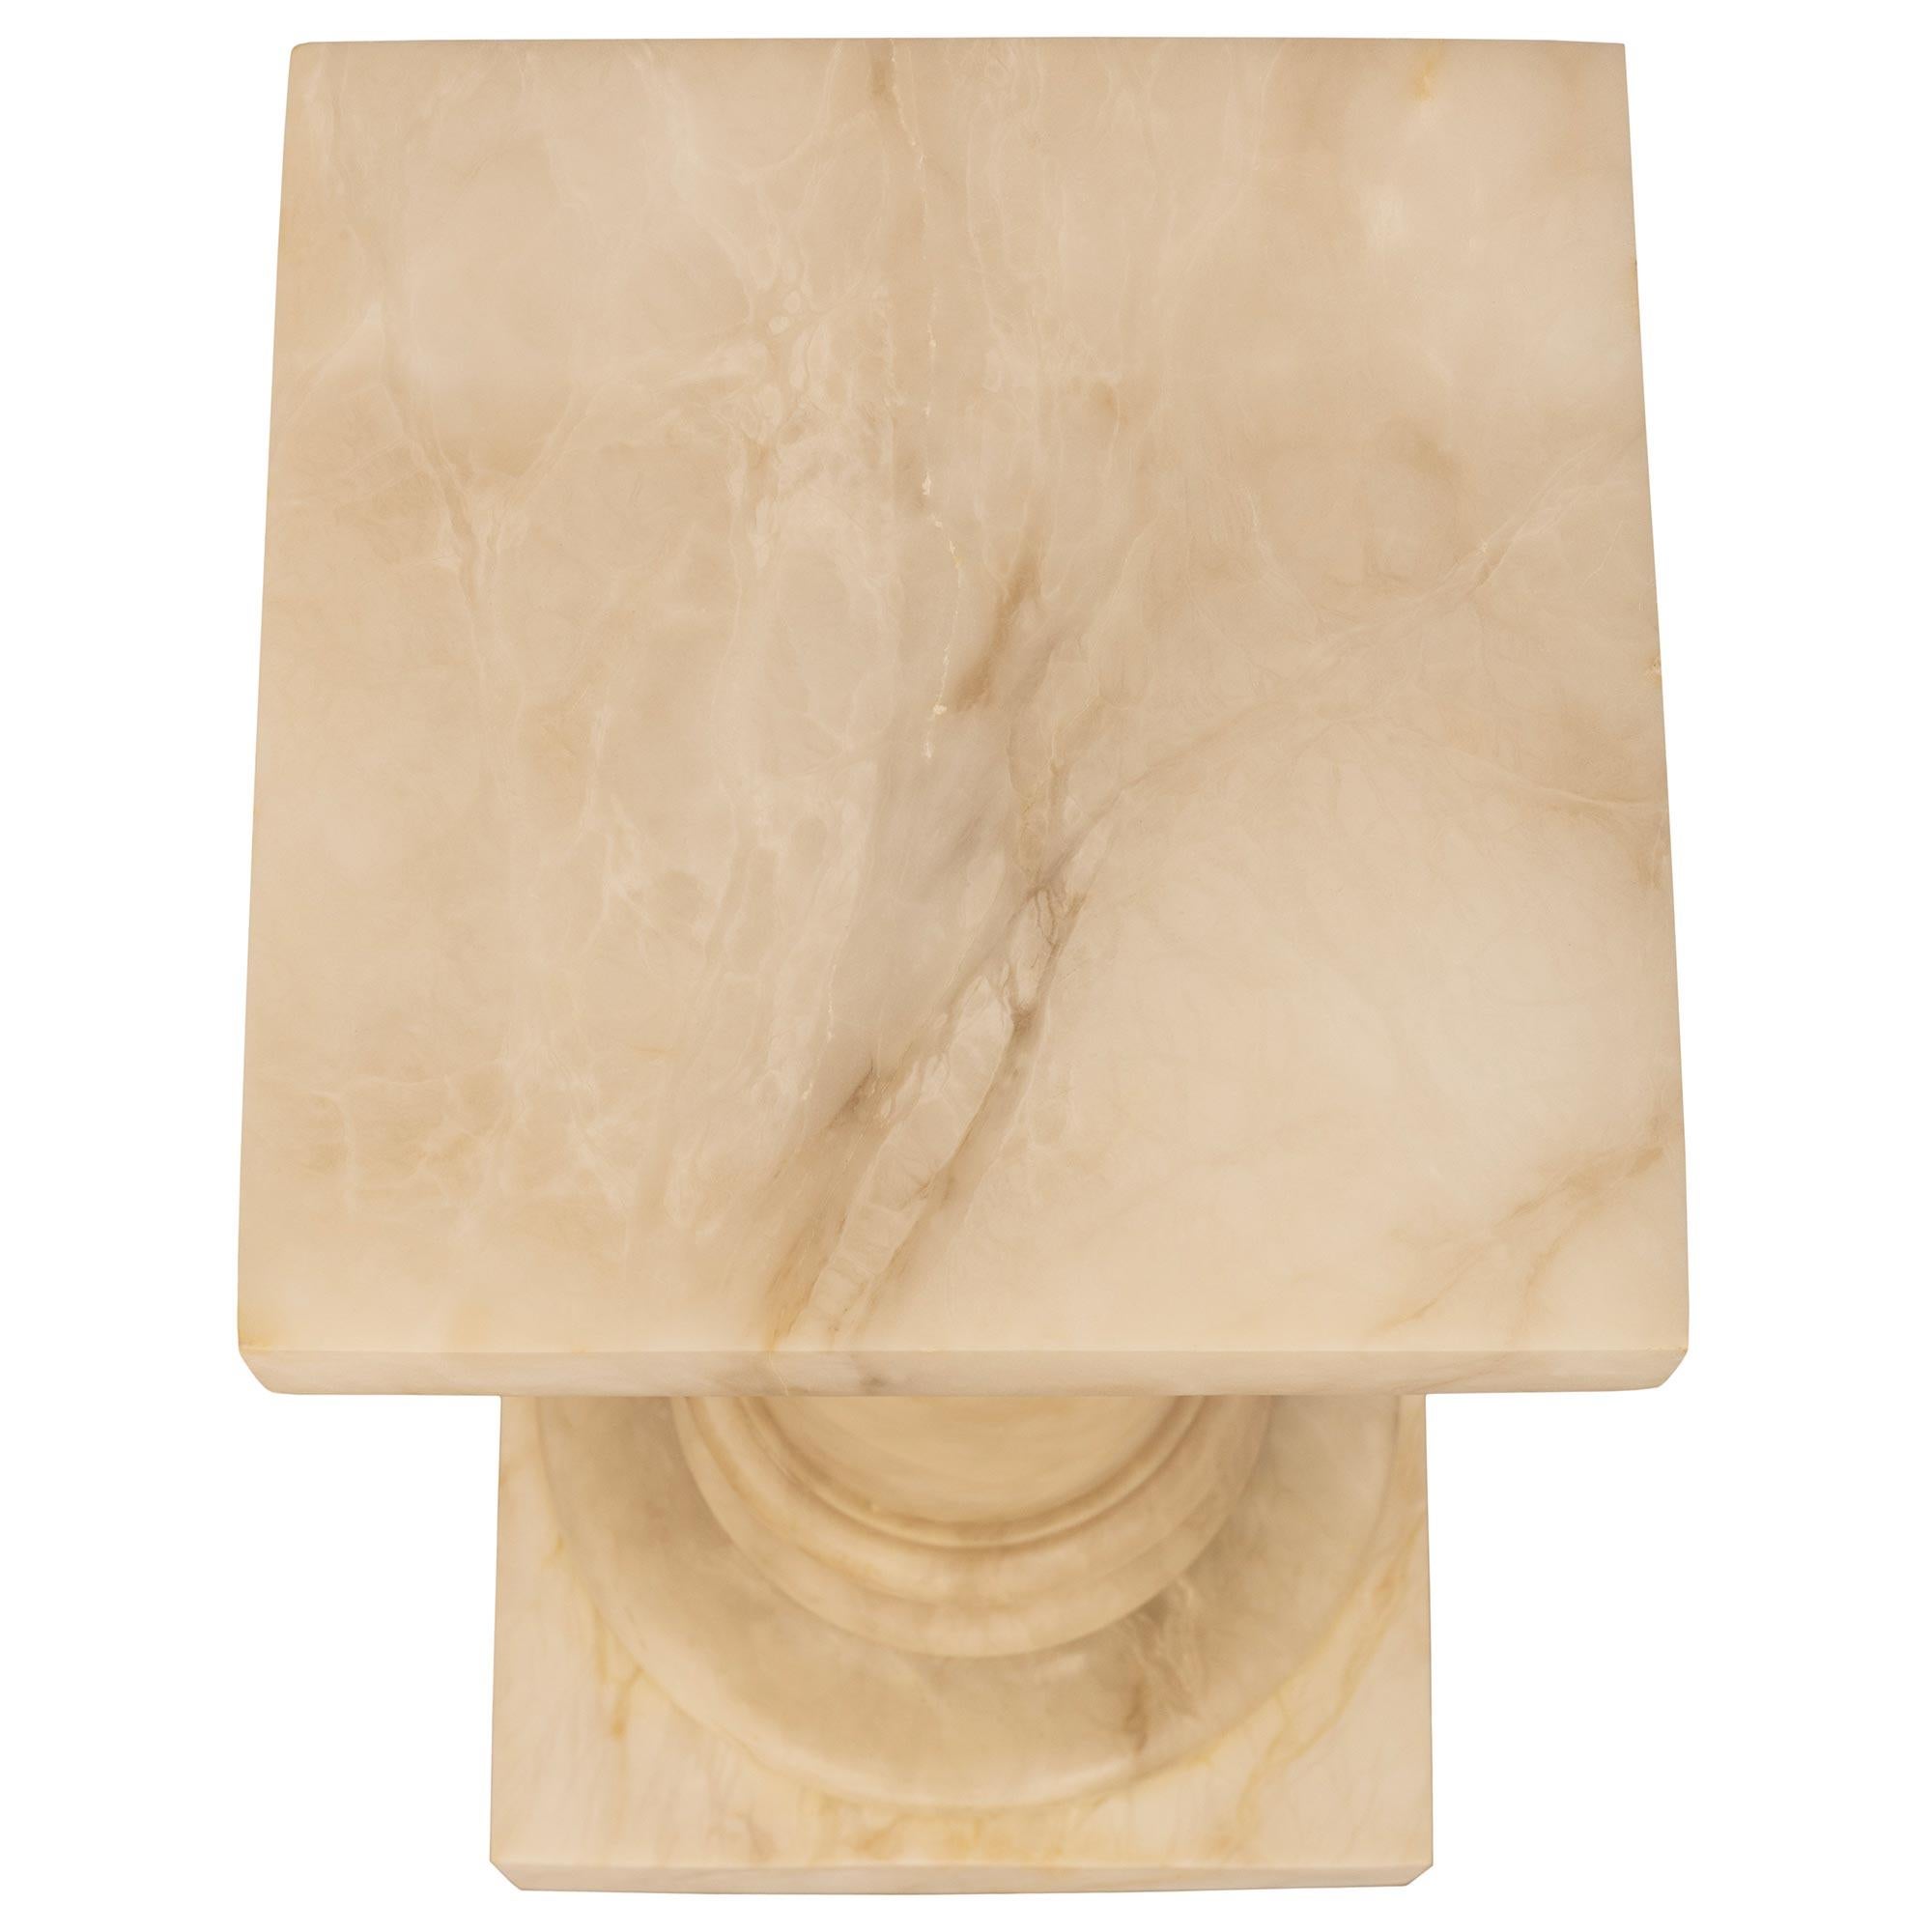 A handsome Italian 19th century cream colored Alabaster pedestal. The pedestal is raised by an impressive square block plinth below a mottled circular base. The circular column is below another circular mottled designed element all below the top